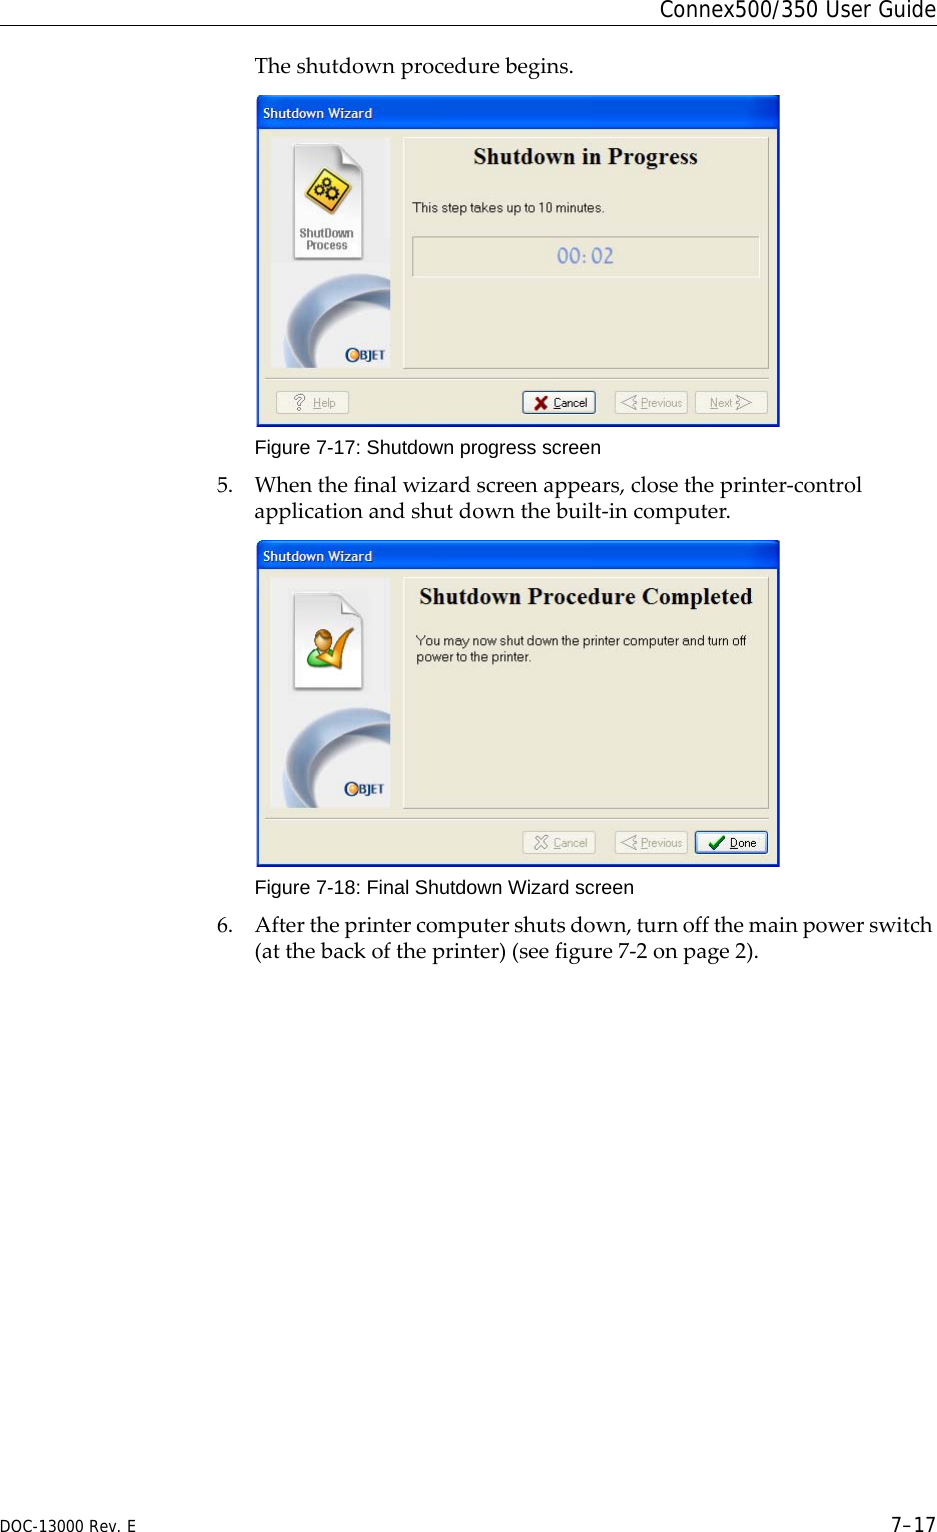 DOC-13000 Rev. E 7–17Connex500/350 User GuideTheshutdownprocedurebegins.Figure 7-17: Shutdown progress screen5. Whenthefinalwizardscreenappears,closetheprinter‐controlapplicationandshutdownthebuilt‐incomputer.Figure 7-18: Final Shutdown Wizard screen6. Aftertheprintercomputershutsdown,turnoffthemainpowerswitch(atthebackoftheprinter)(seefigure 7‐2onpage 2).